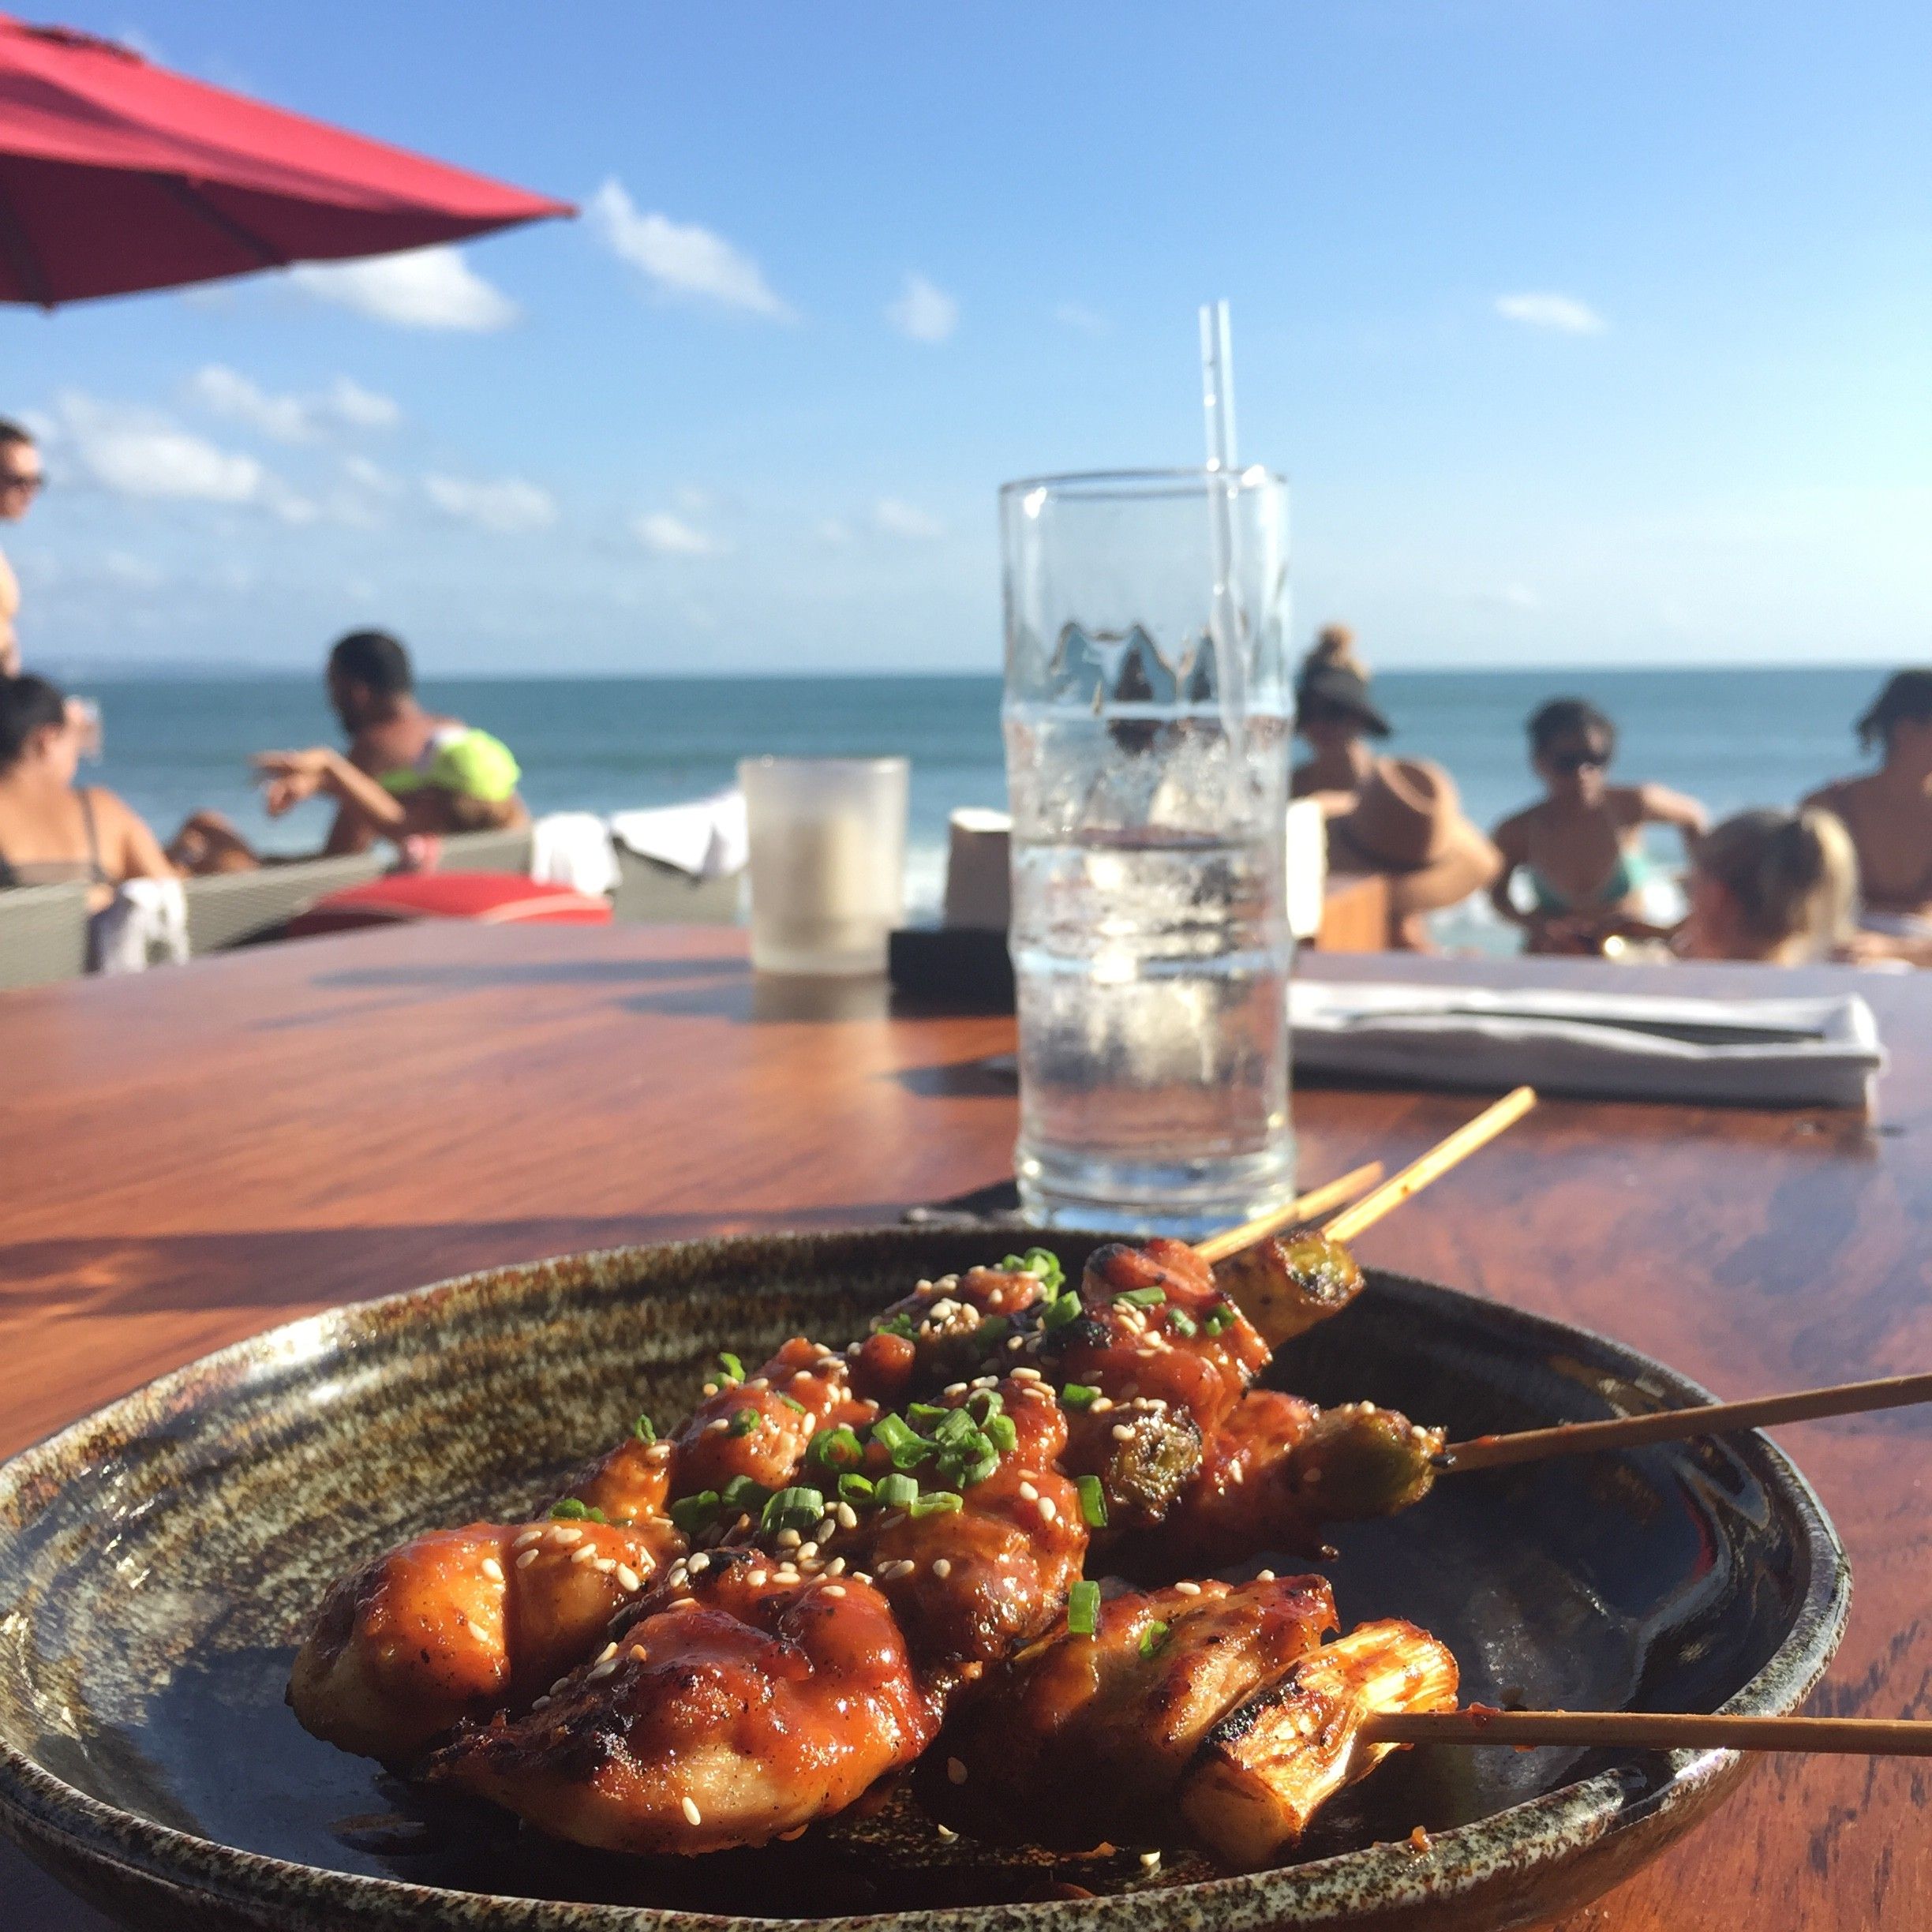 Caption: A photo of glazed chicken satay on a plate with sesame seeds and green onion sprinkled on top. (Local Guide @AngieYC)